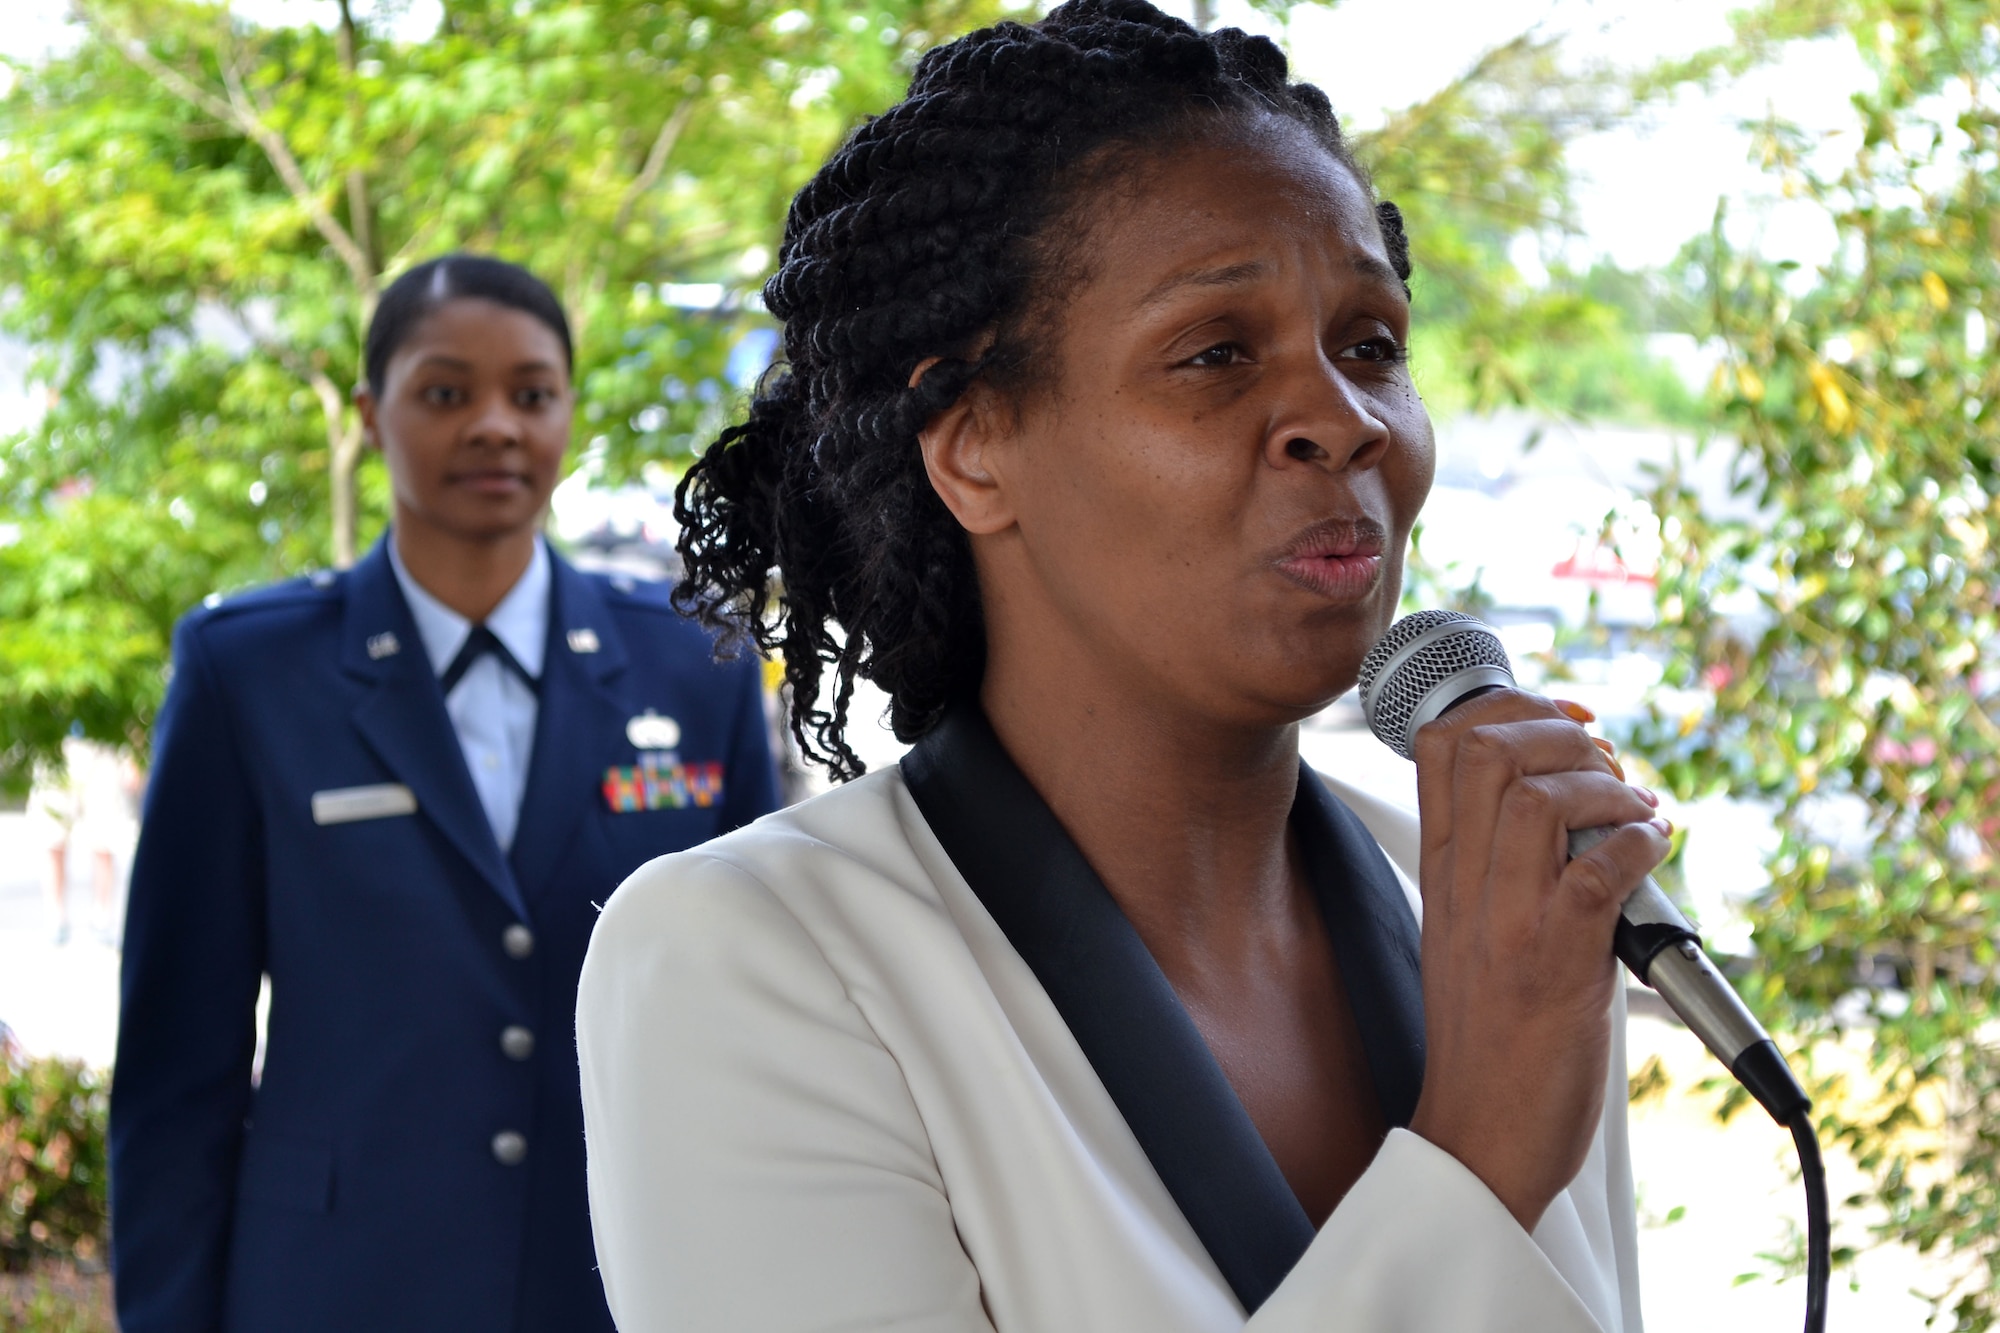 Opening the Valley Forge Casino's 2015 Armed Forces Day recognition event, May 16, 2015, Tasha Moore, banquet captain with the casino, belts an a cappella rendition of the national anthem. First Lt. Charese Adams, logistic readiness office with the 201st RED HORSE, Detachment 1, was this year's keynote speaker during the ceremony. (U.S. Air National Guard photo by Master Sgt. Christopher Botzum/Released)